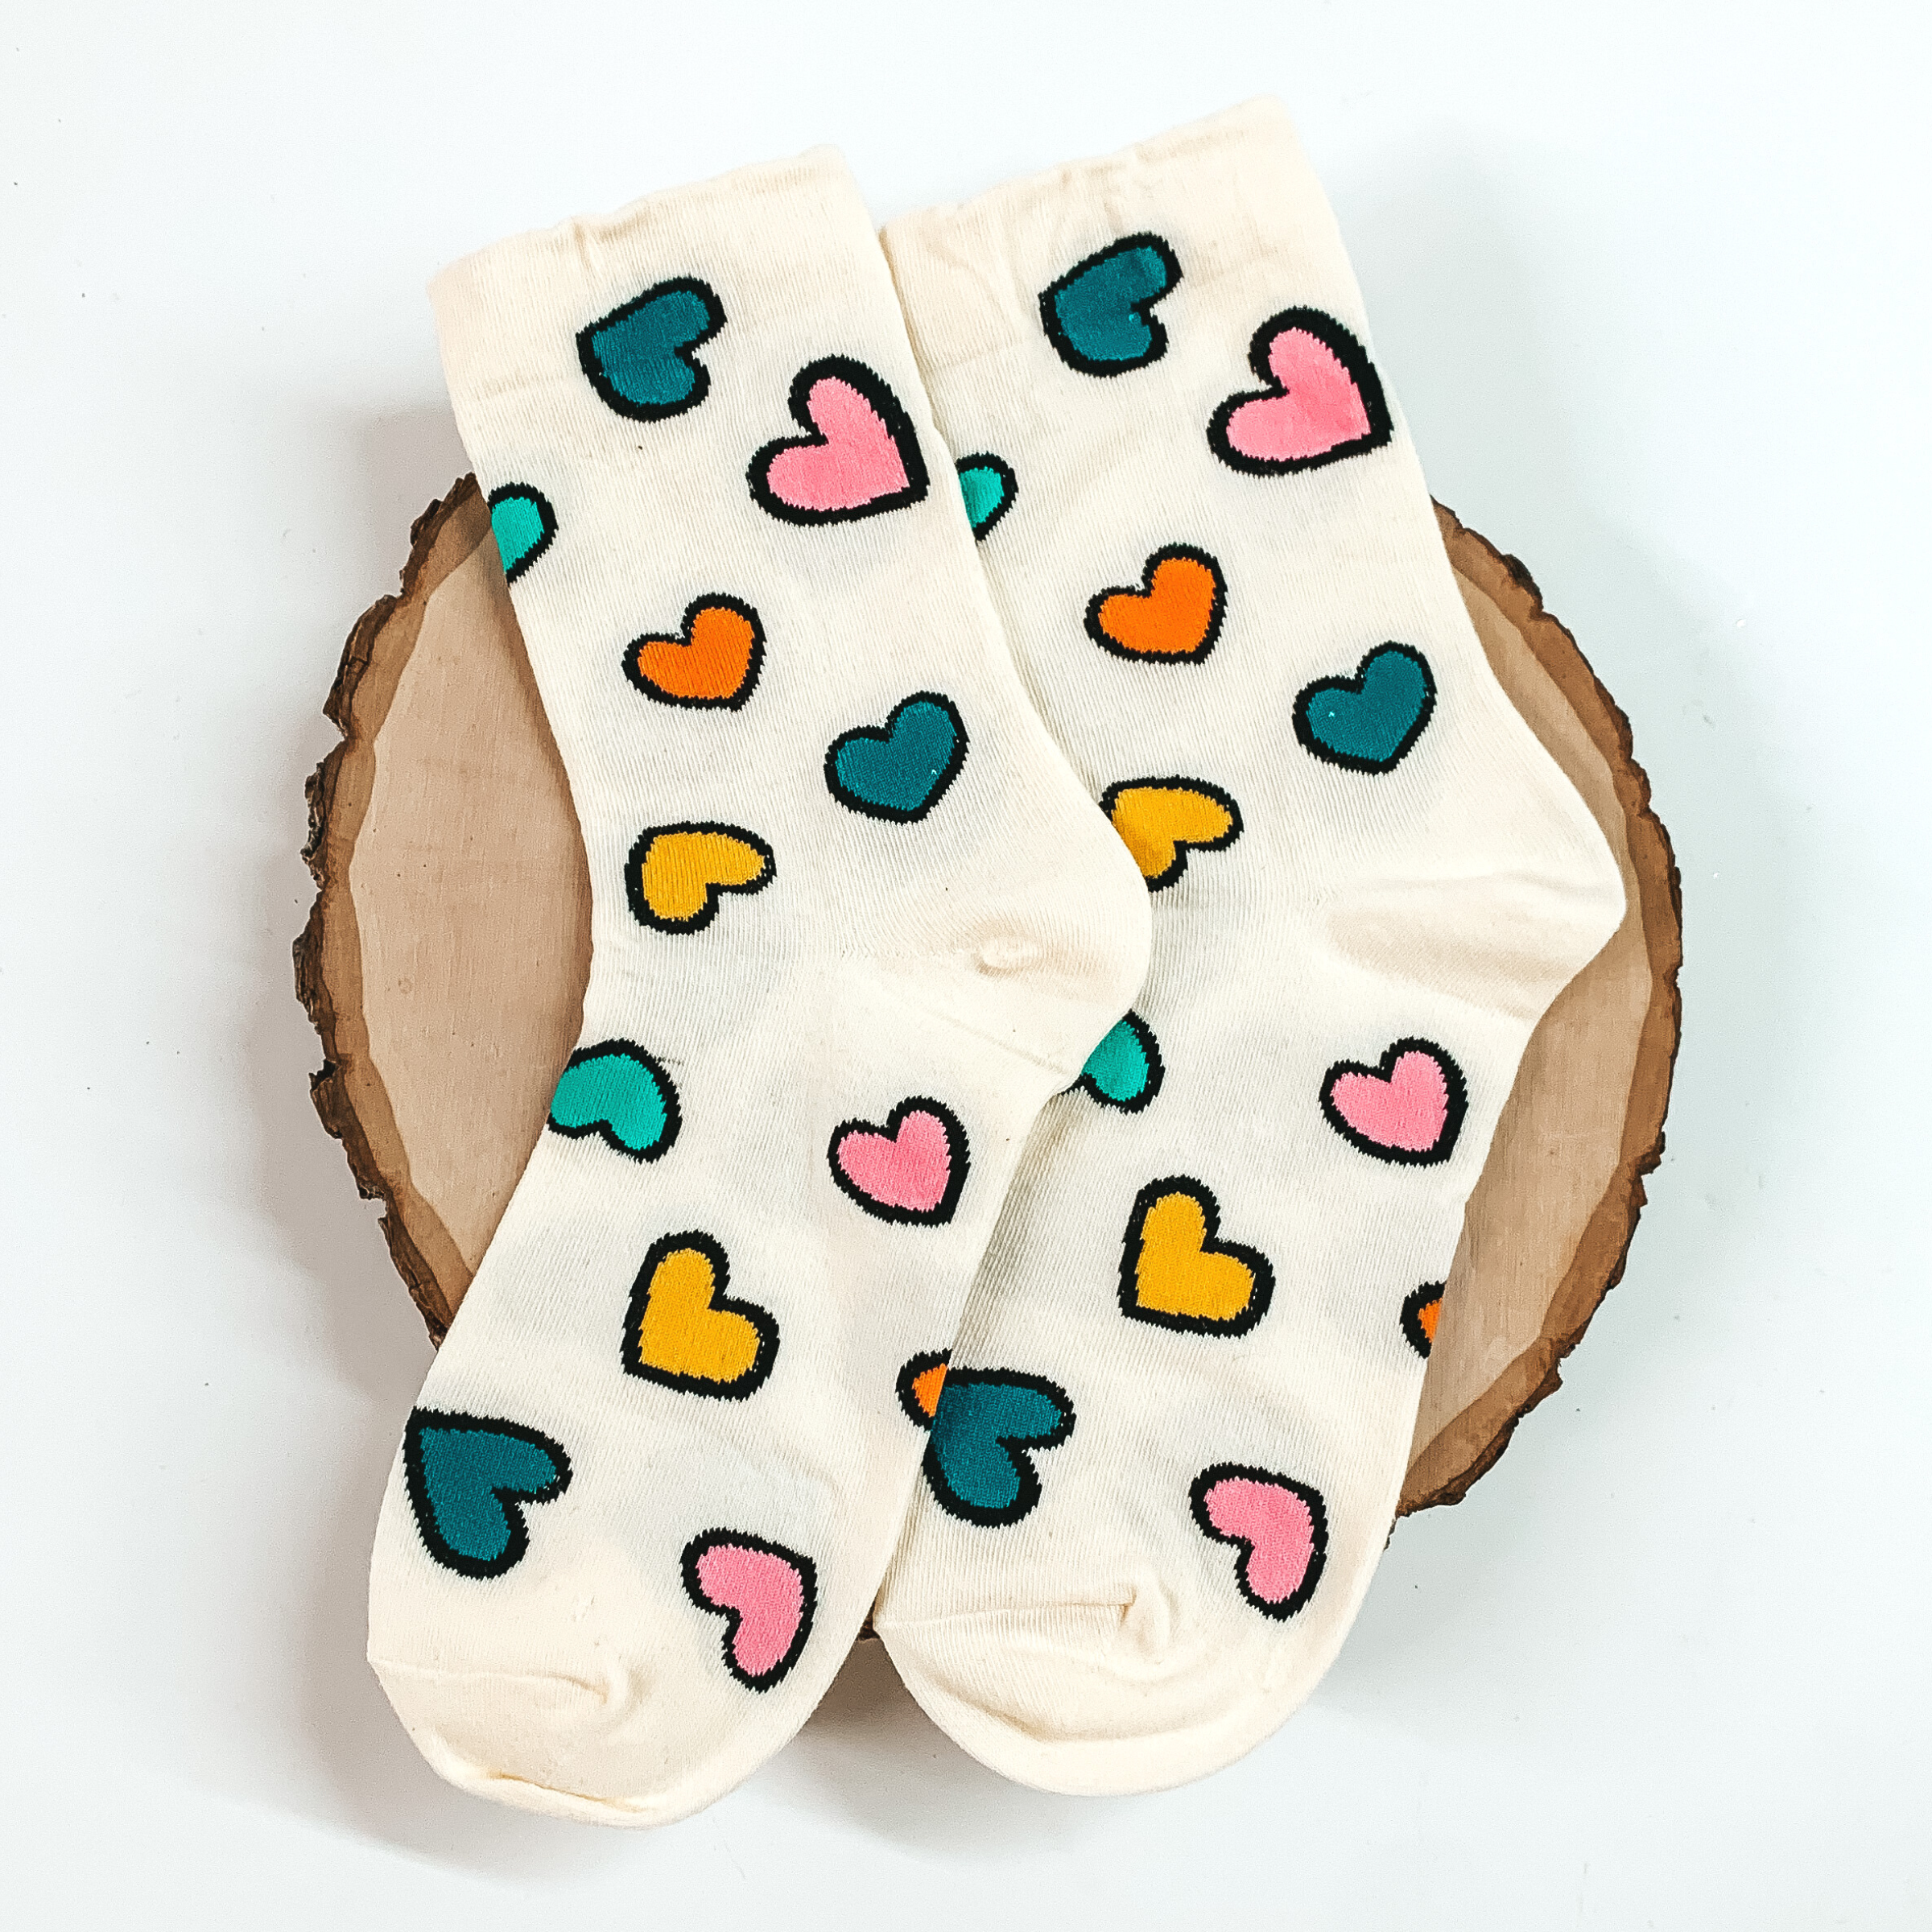 Cream ankle socks with a multicolored heart design. The hearts have a black outline. These socks are pictured on a piece of wood on a white background. 